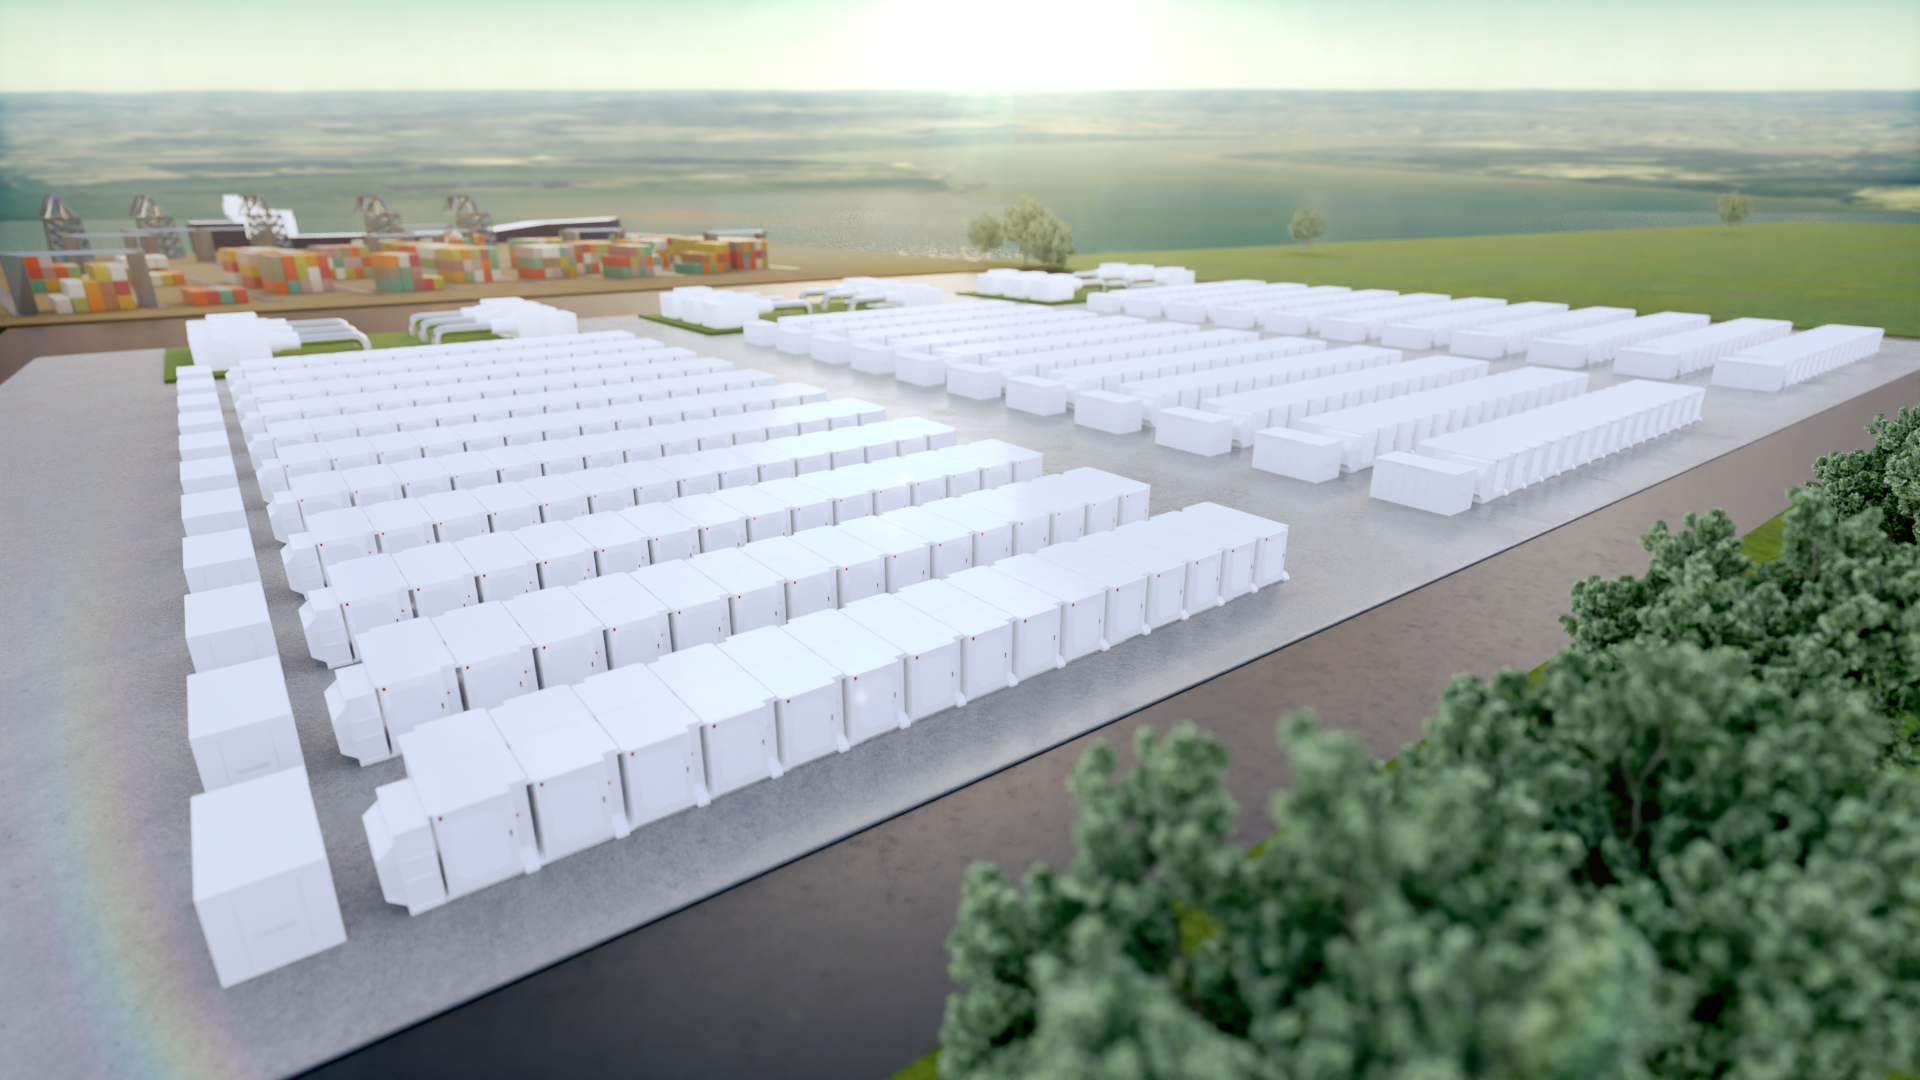 Artists impression of the battery energy storage project at the Gateway Energy Centre site